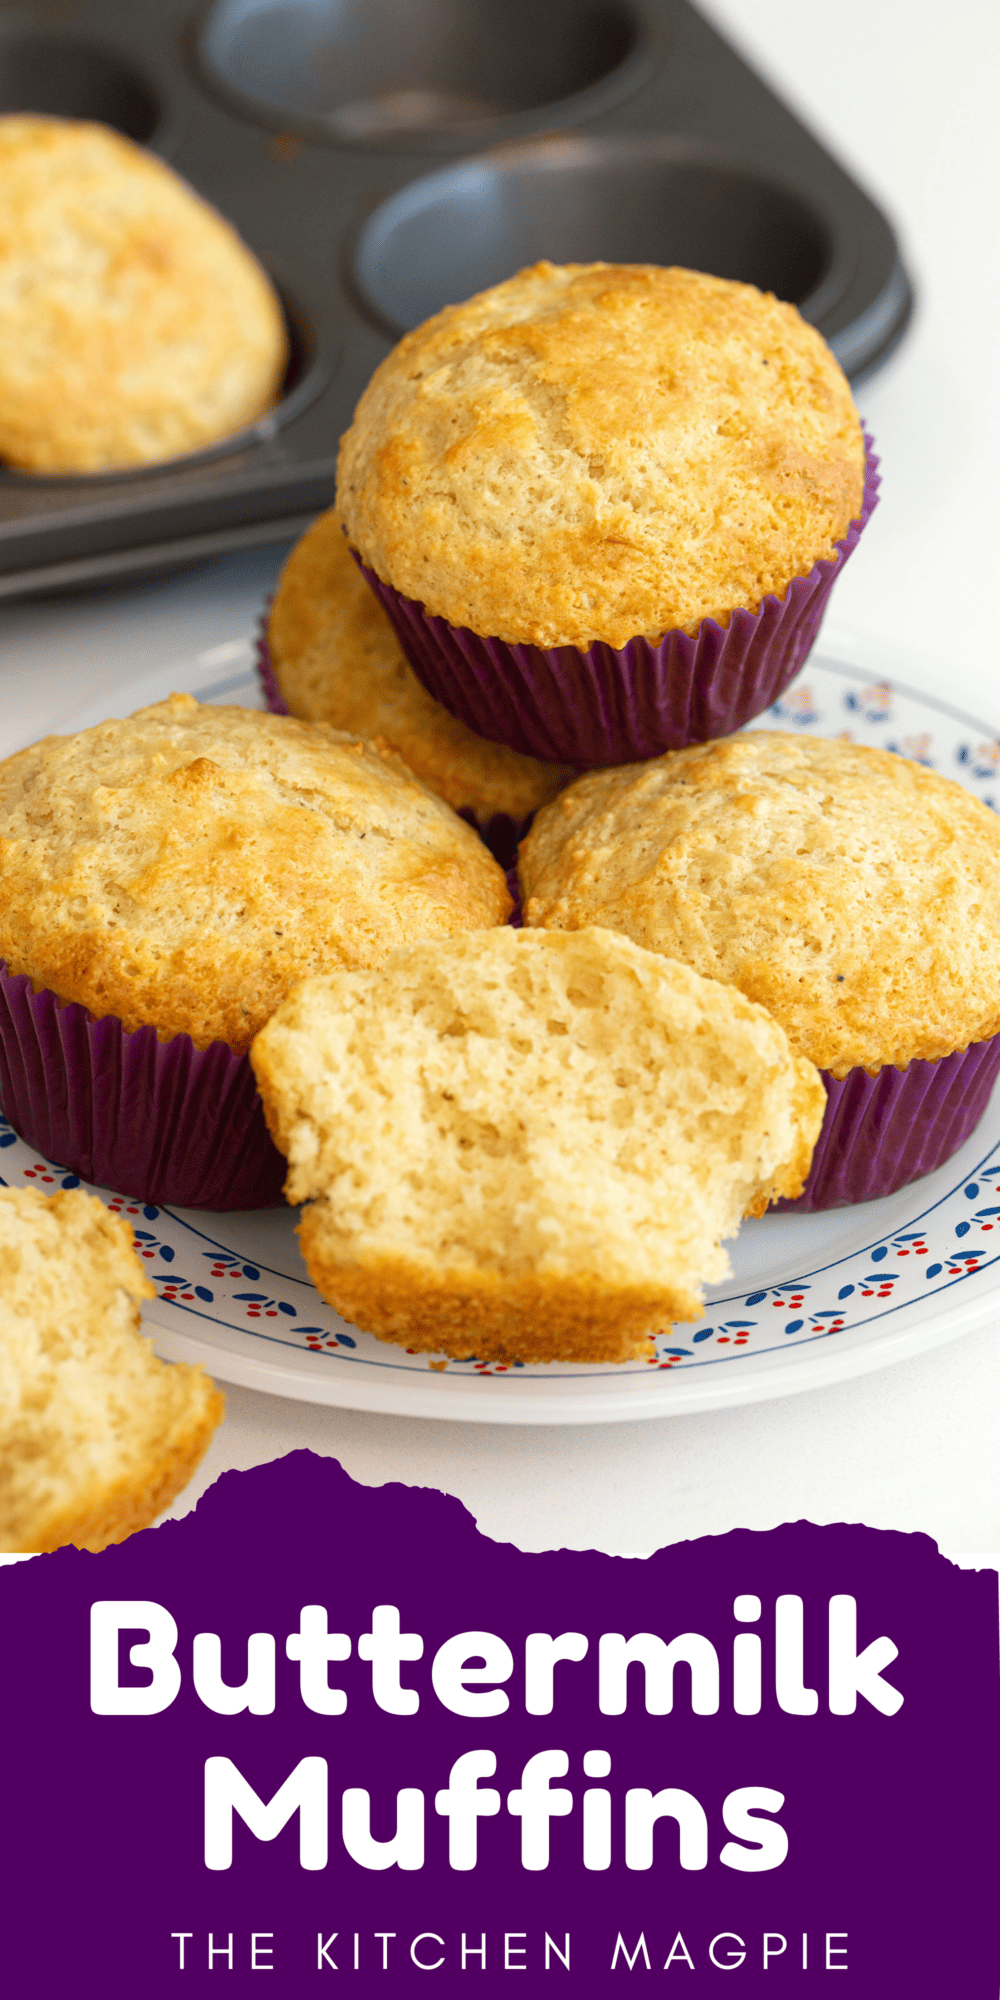 How to make buttermilk muffins. These coarse crumbed, nutmeg spiced treats are a great way to use up your buttermilk.